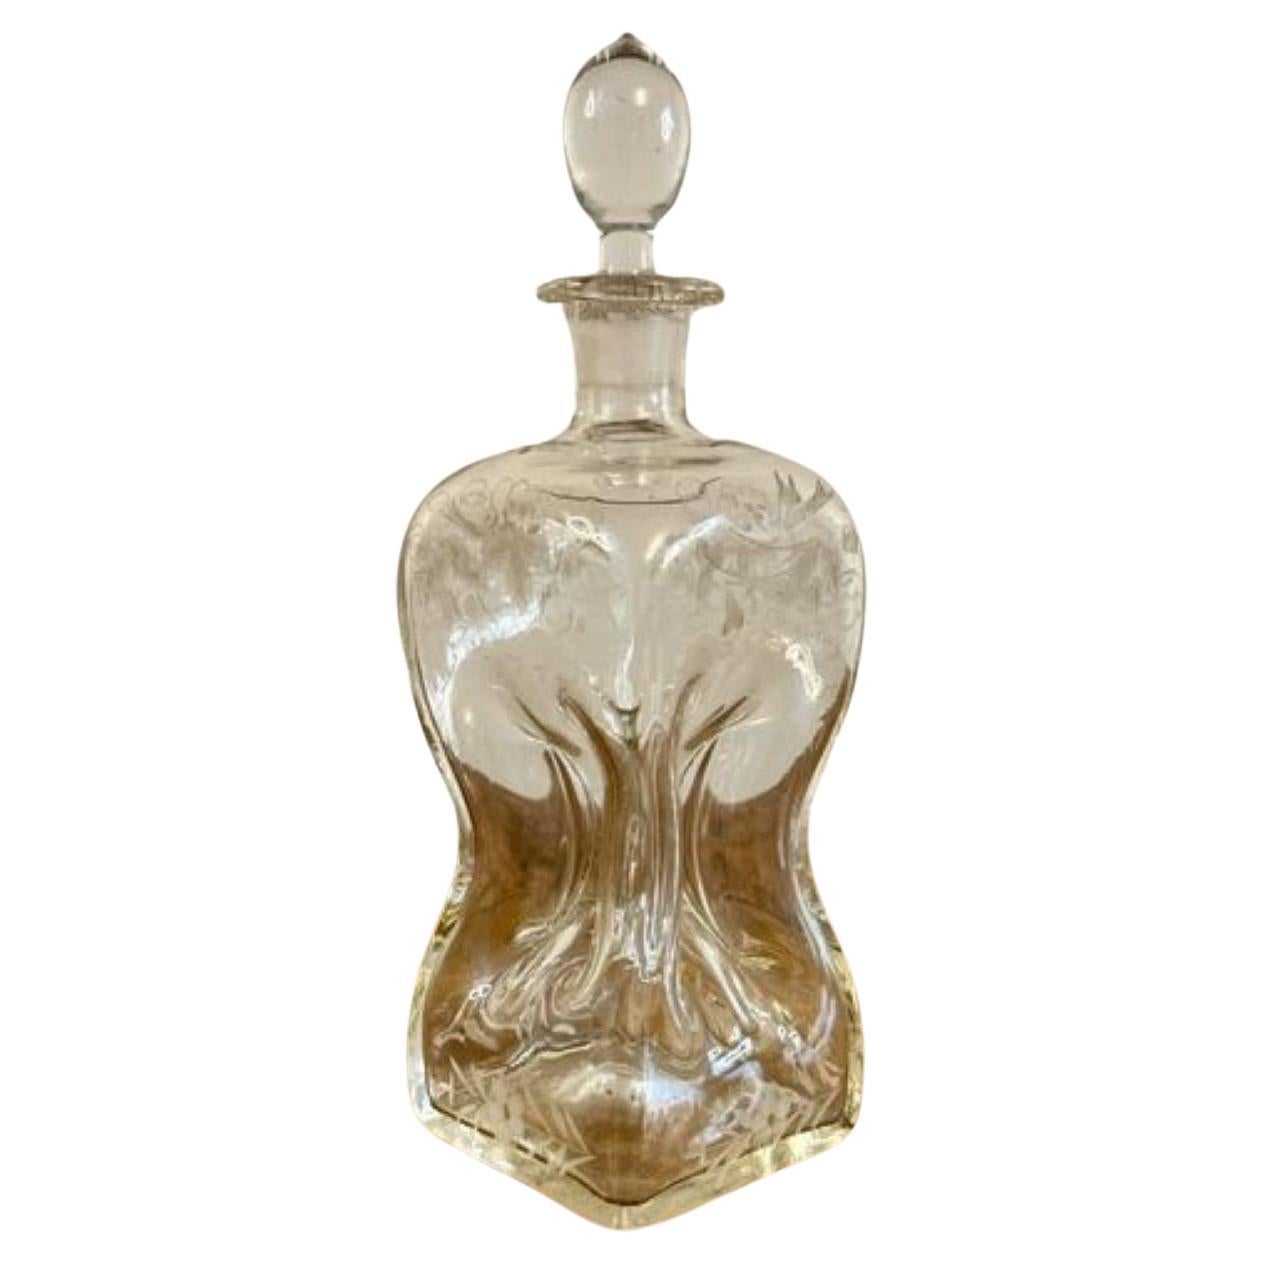 Stunning quality antique Victorian hourglass shaped decanter 